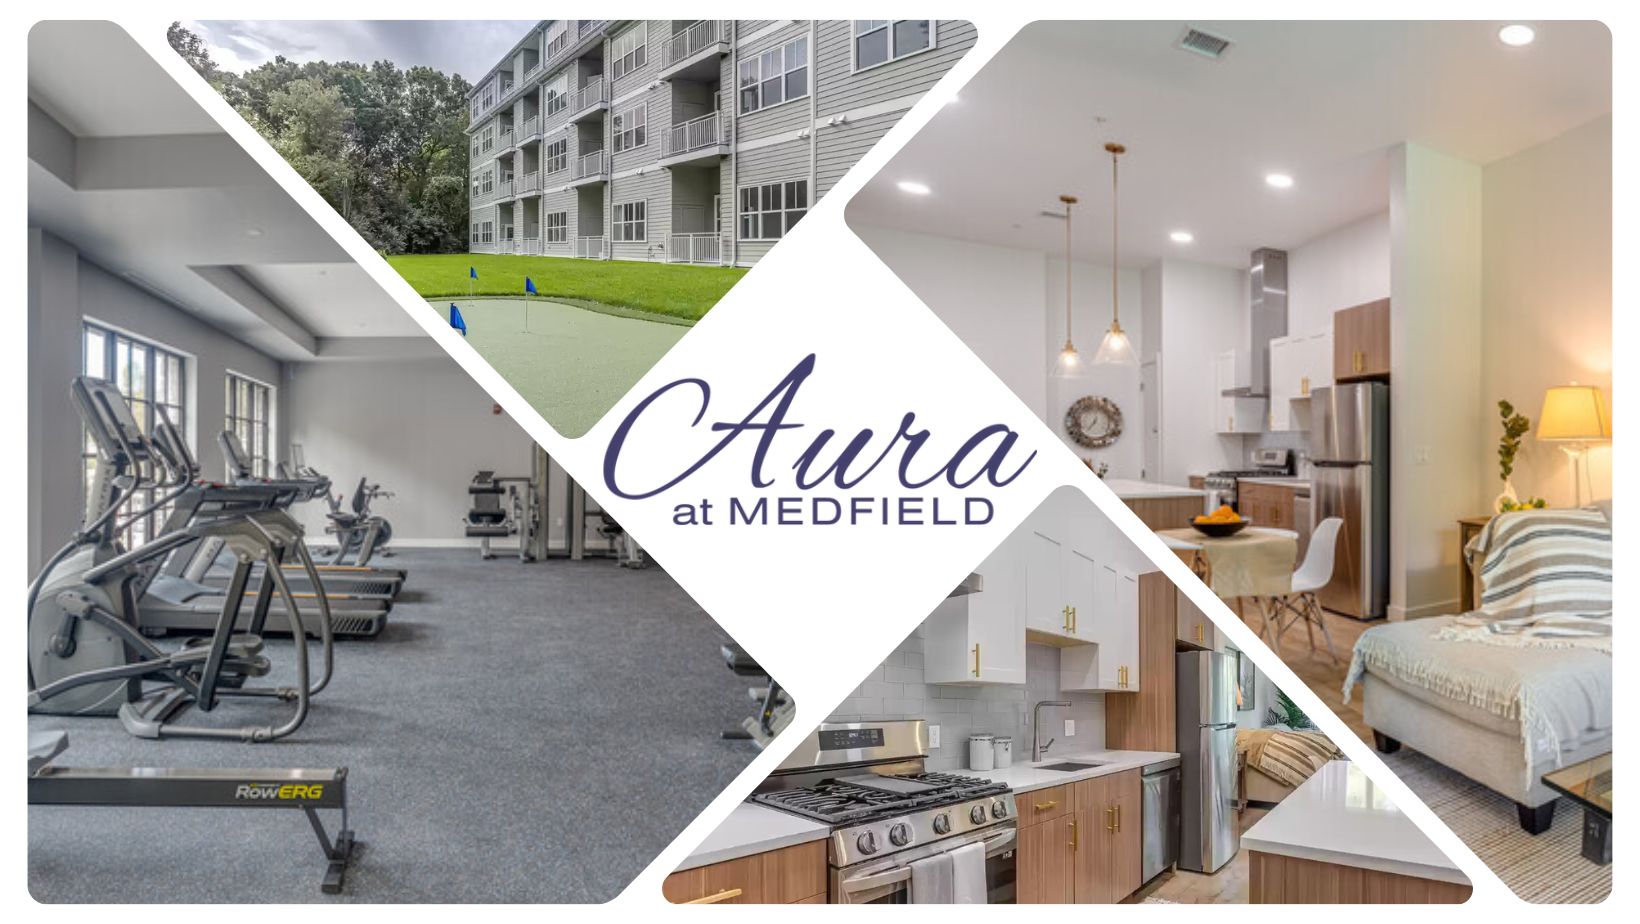 Aura Medfield is a luxurious apartment complex located in Medfield, Massachusetts.